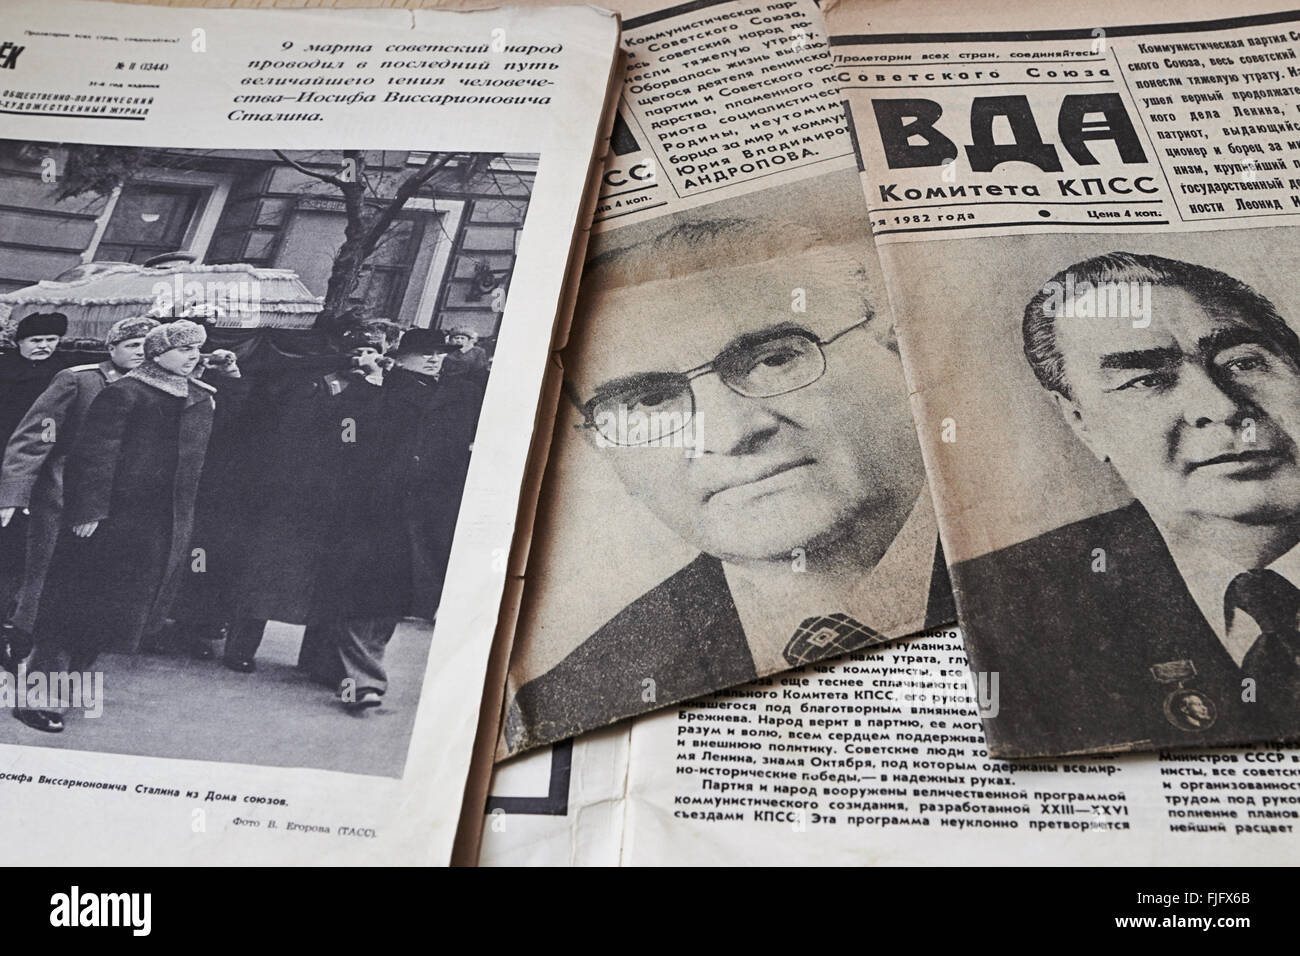 The funeral of Stalin, portraits of Brezhnev and Andropov in Soviet newspapers. Stock Photo